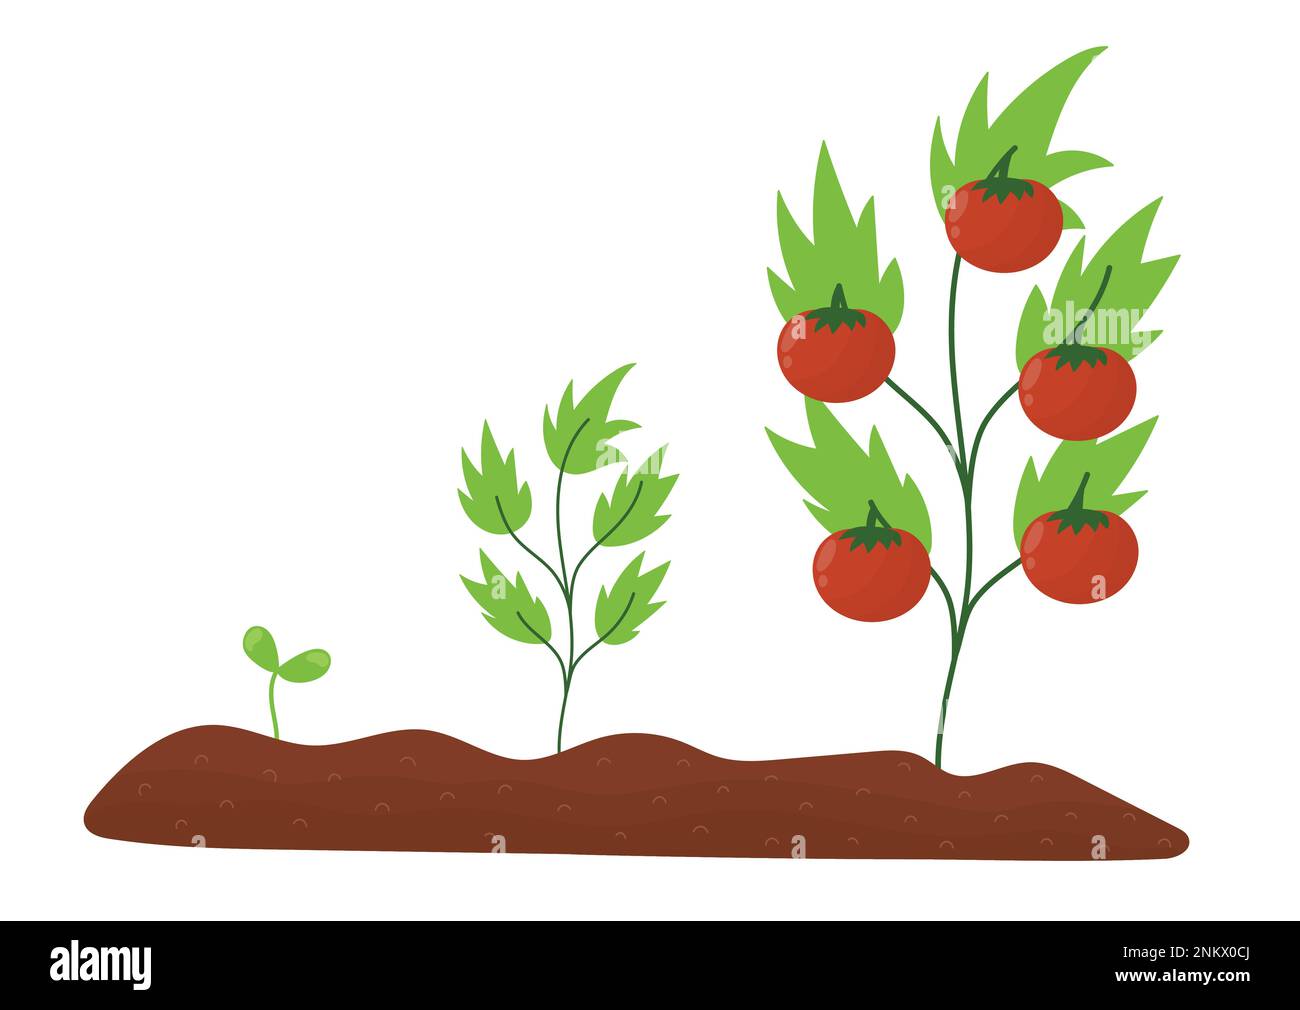 Life cycle of tomato in cartoon style. From a seed to adult plant growing process Stock Vector